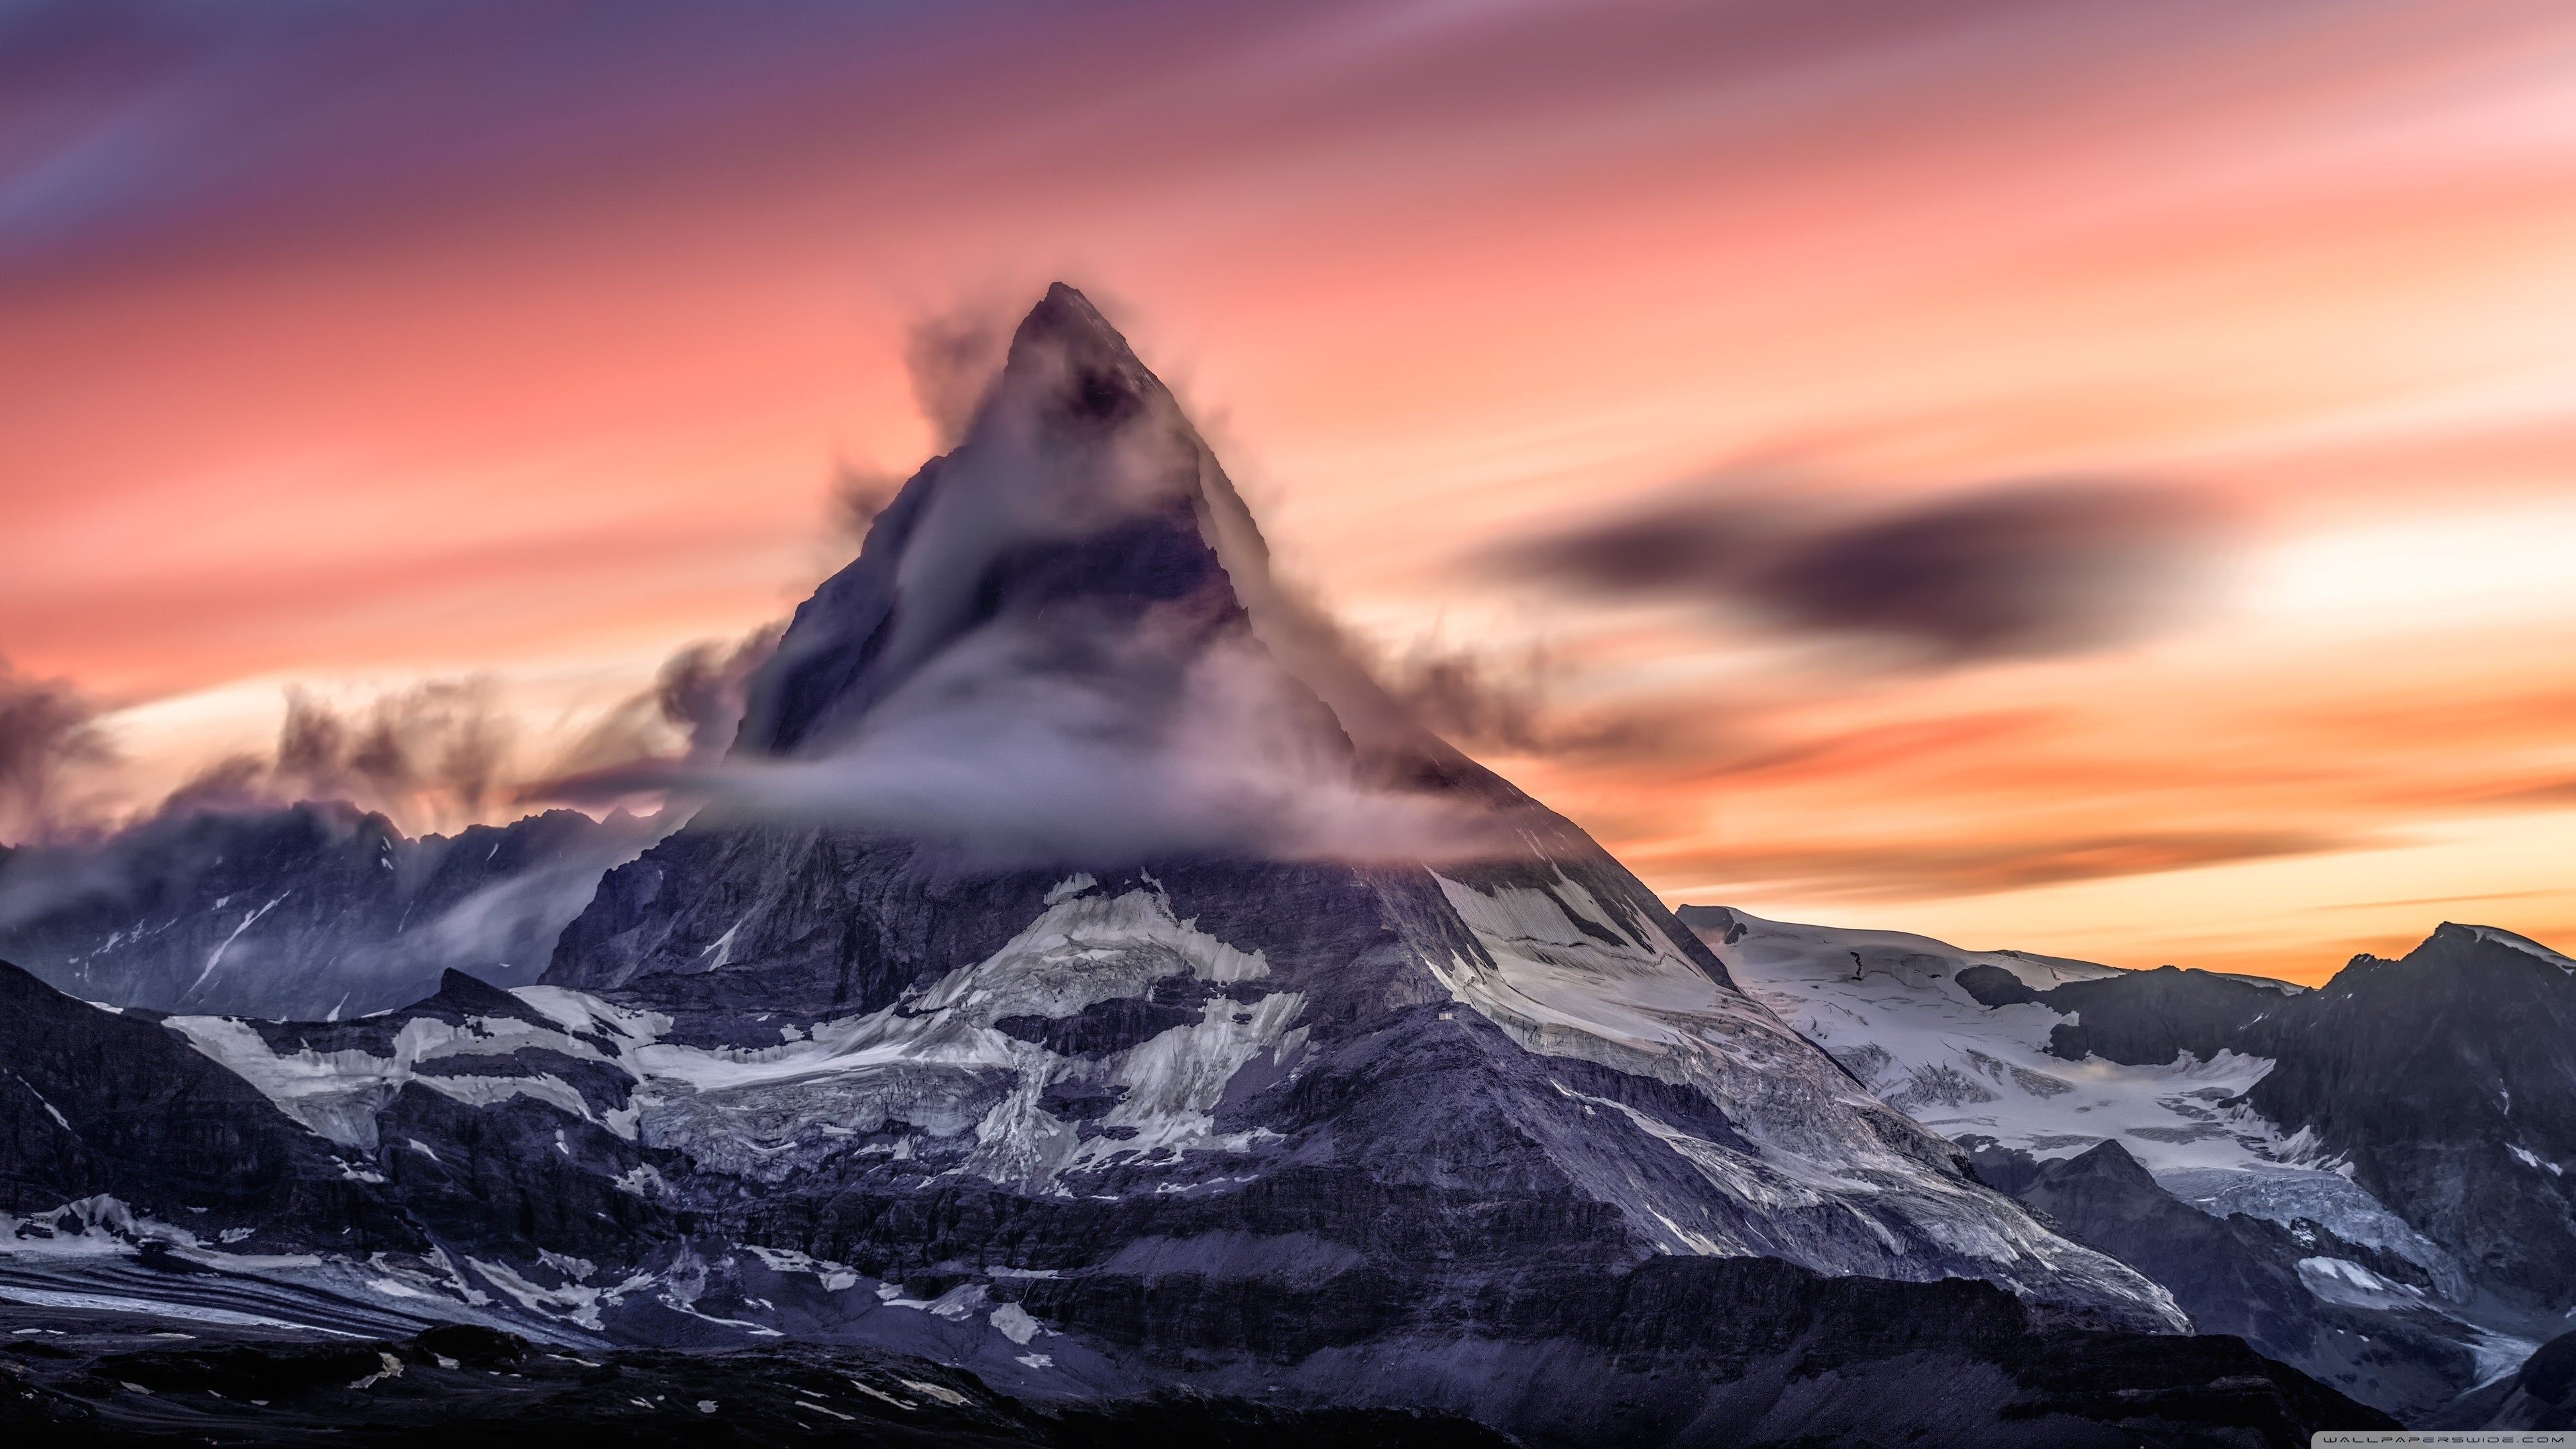 Matterhorn 4K wallpaper for your desktop or mobile screen free and easy to download